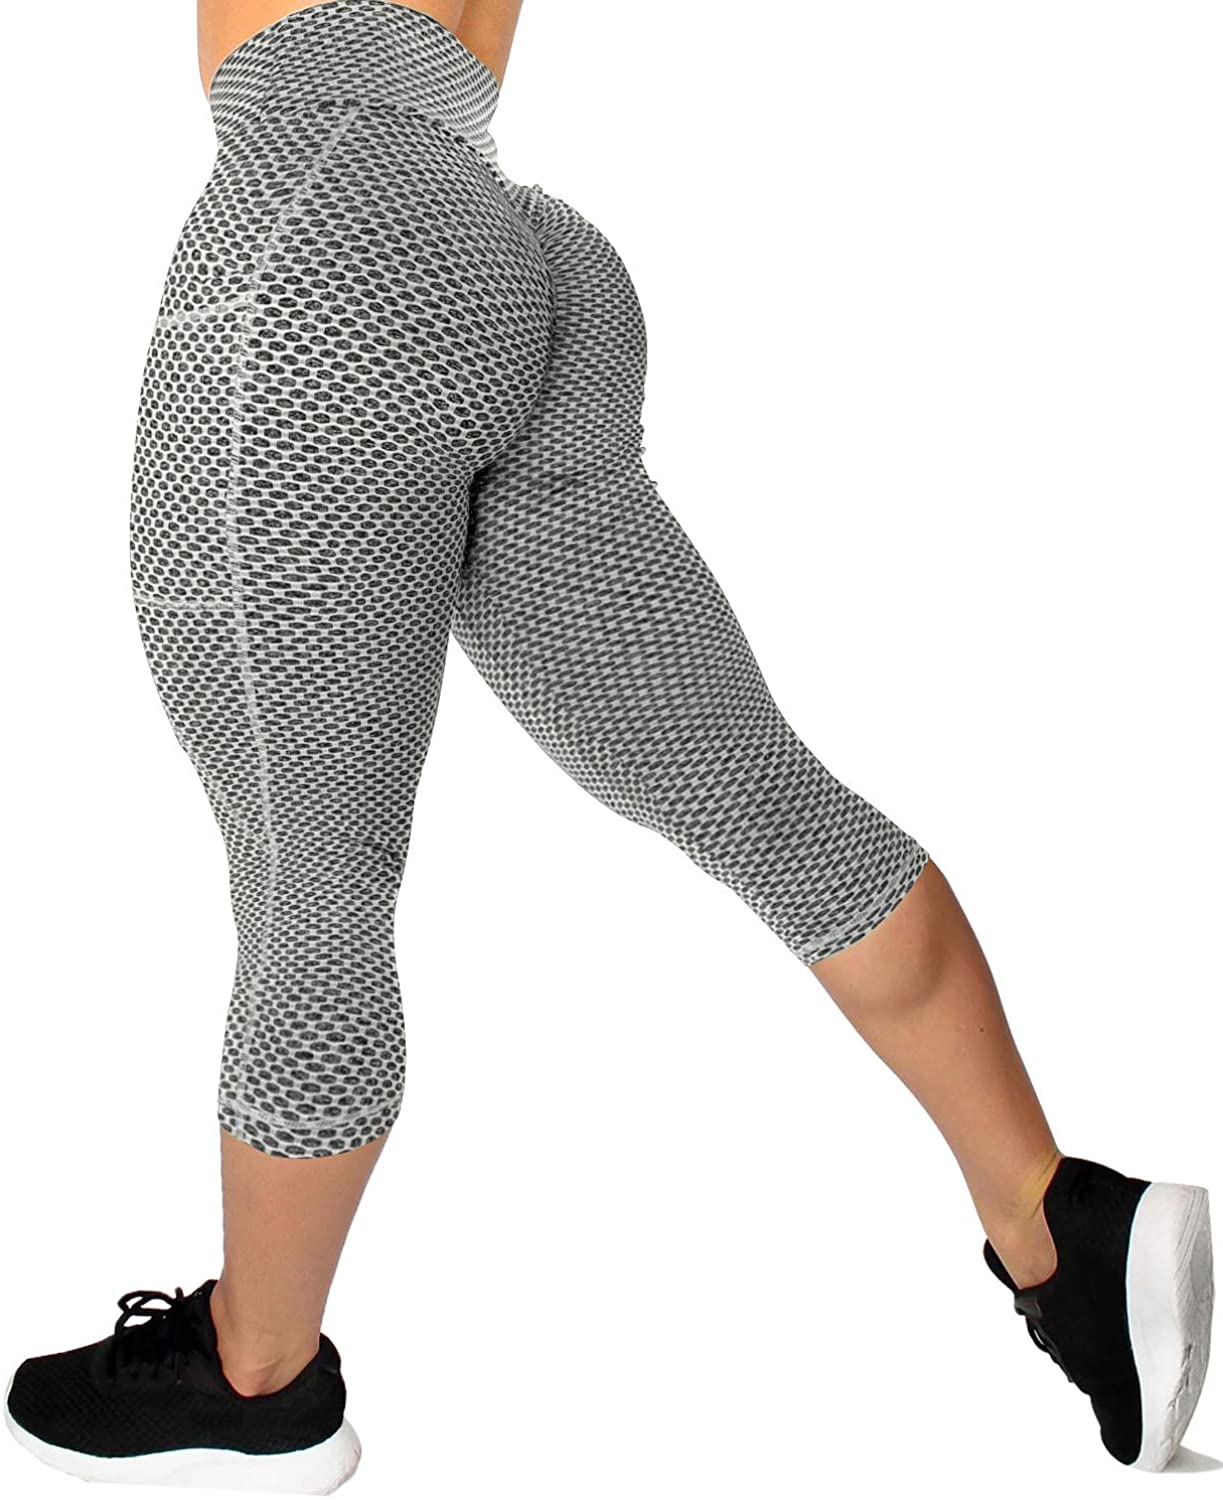 YOFIT Ruched Butt Lifting Yoga Capris Leggings for Women High Waist Yoga  Pants Gym Workout Booty Scrunch Tights